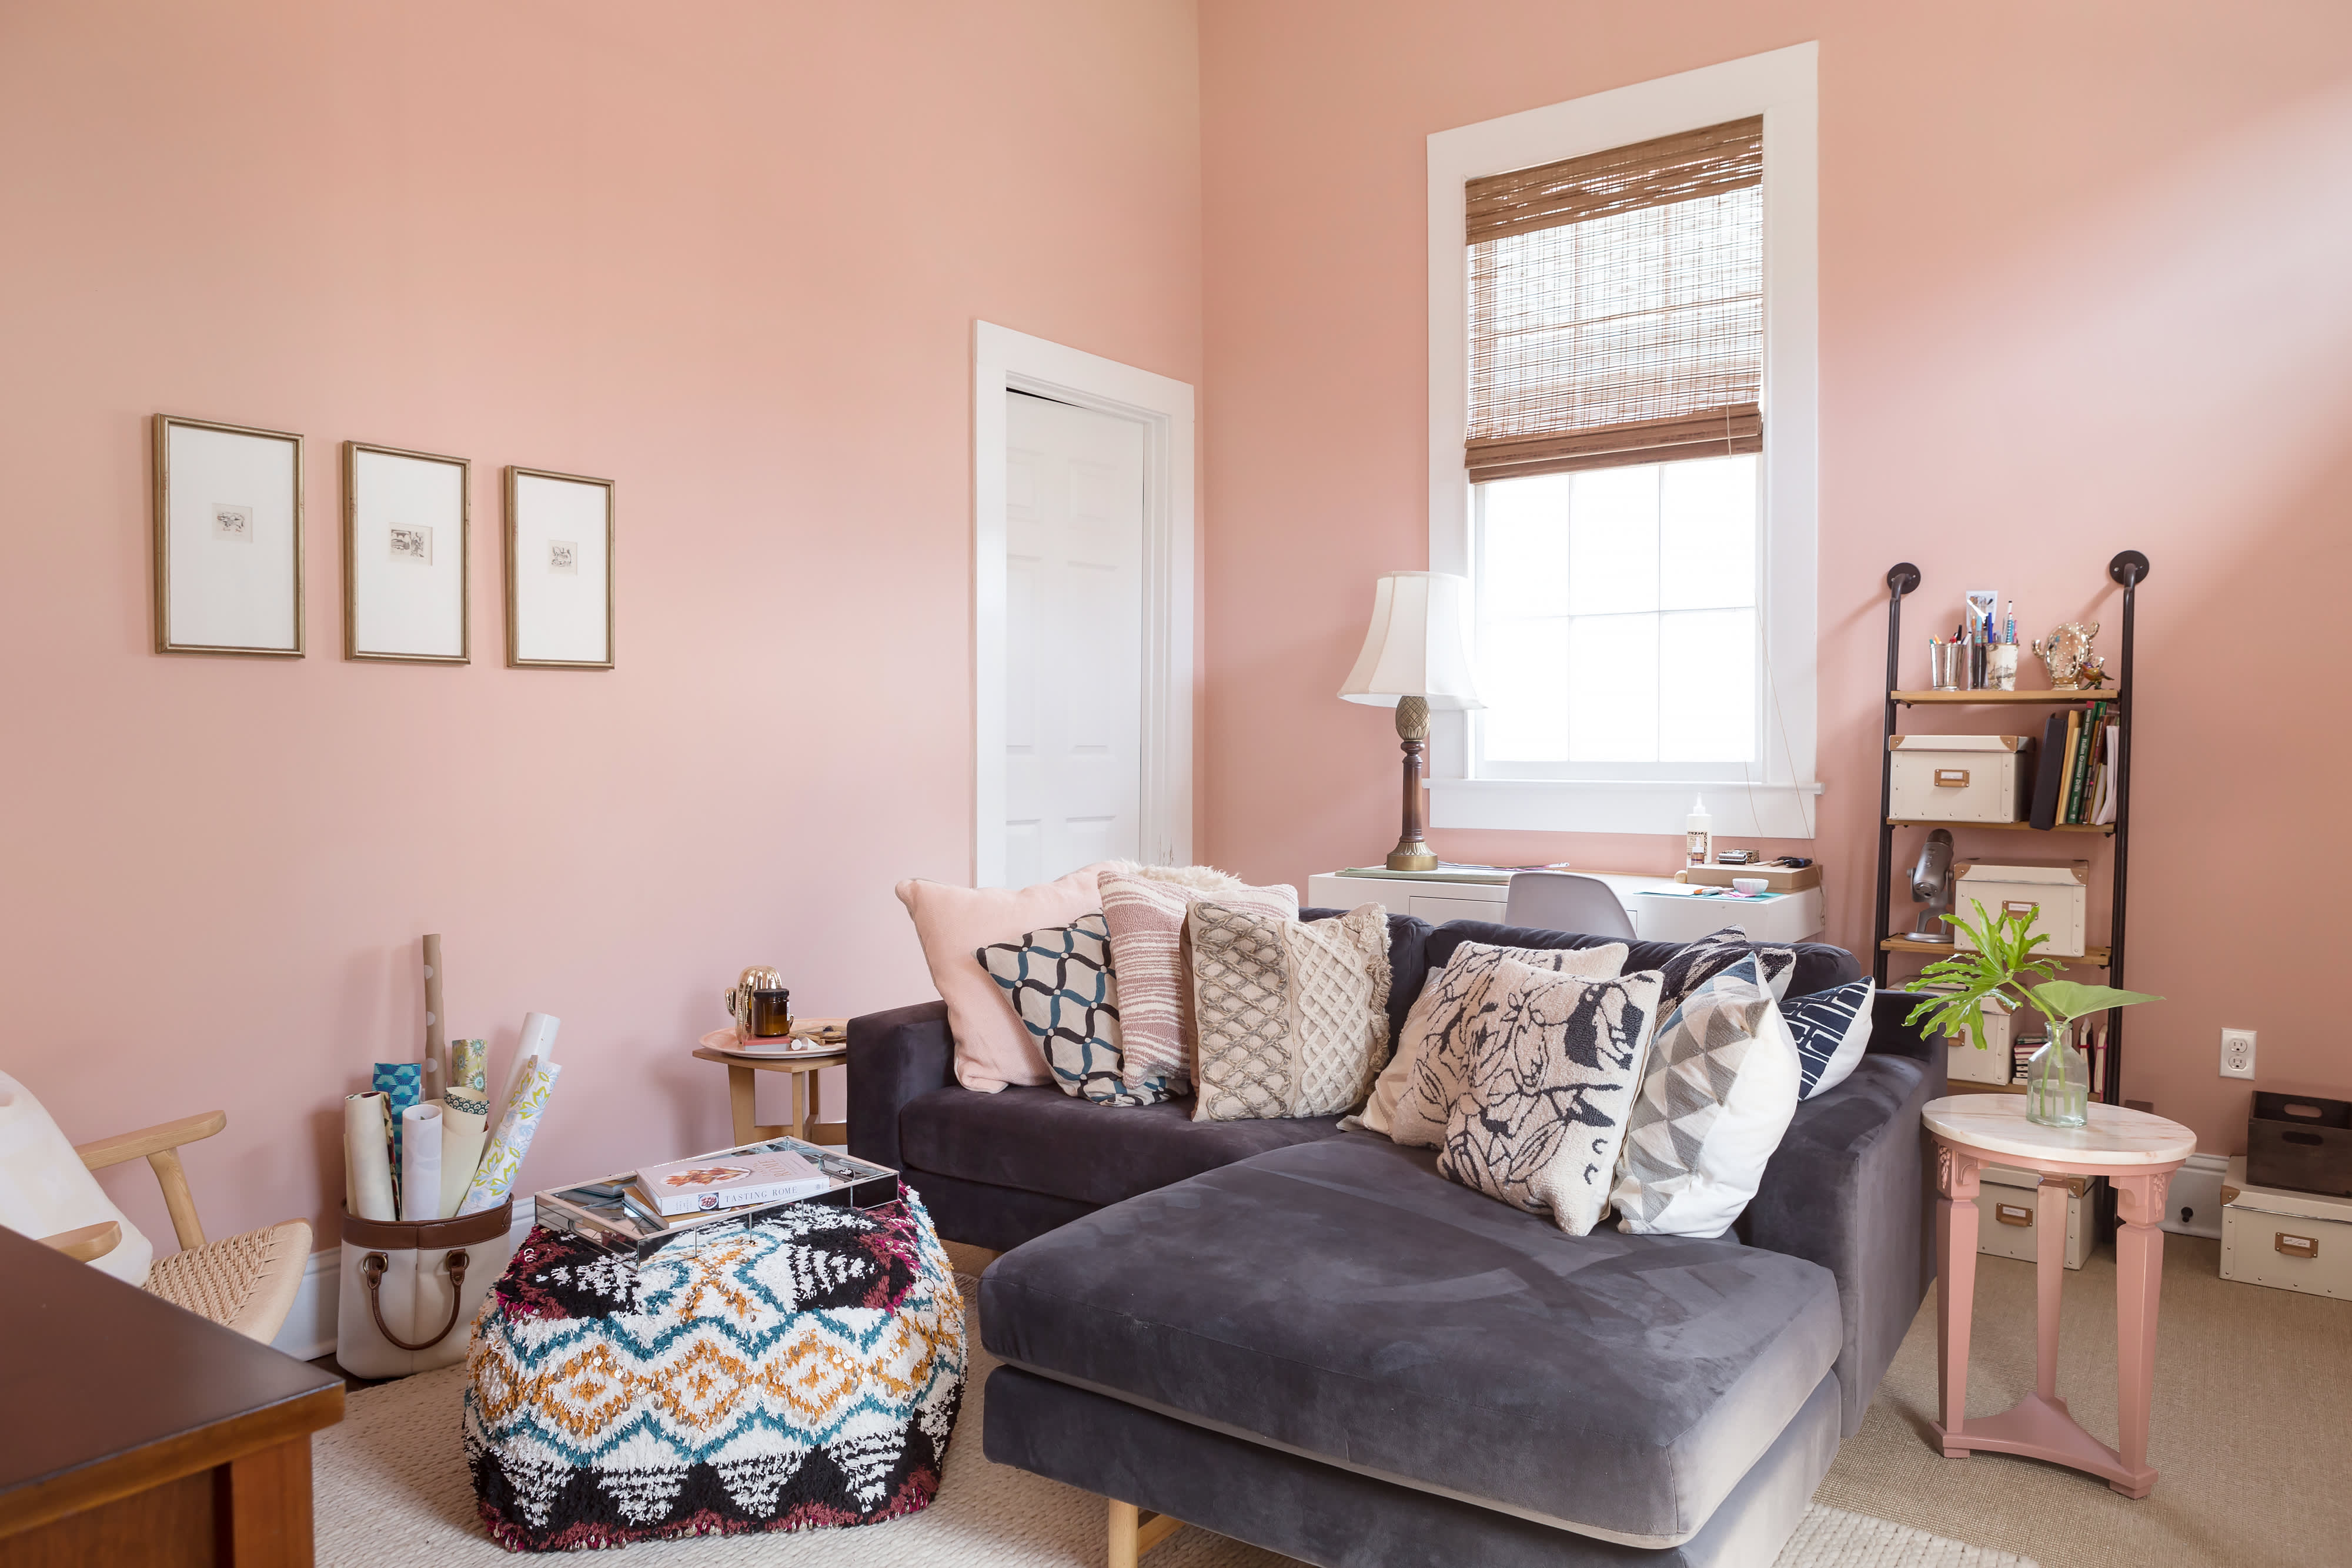 Choose the Best Non-Toxic Paint for Interior Walls